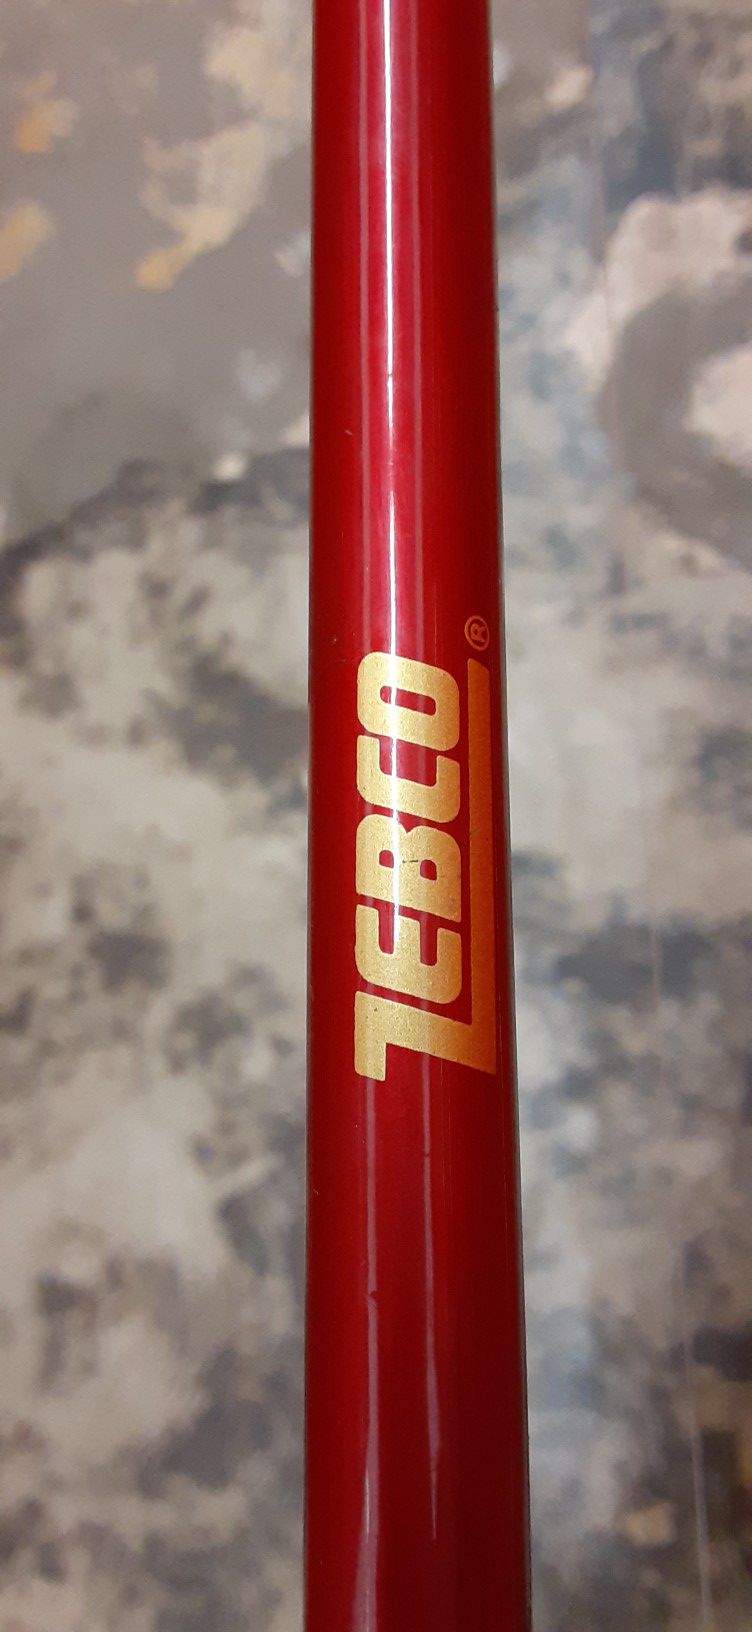 "Zebco" 8' two piece fishing pole with a long cast reel